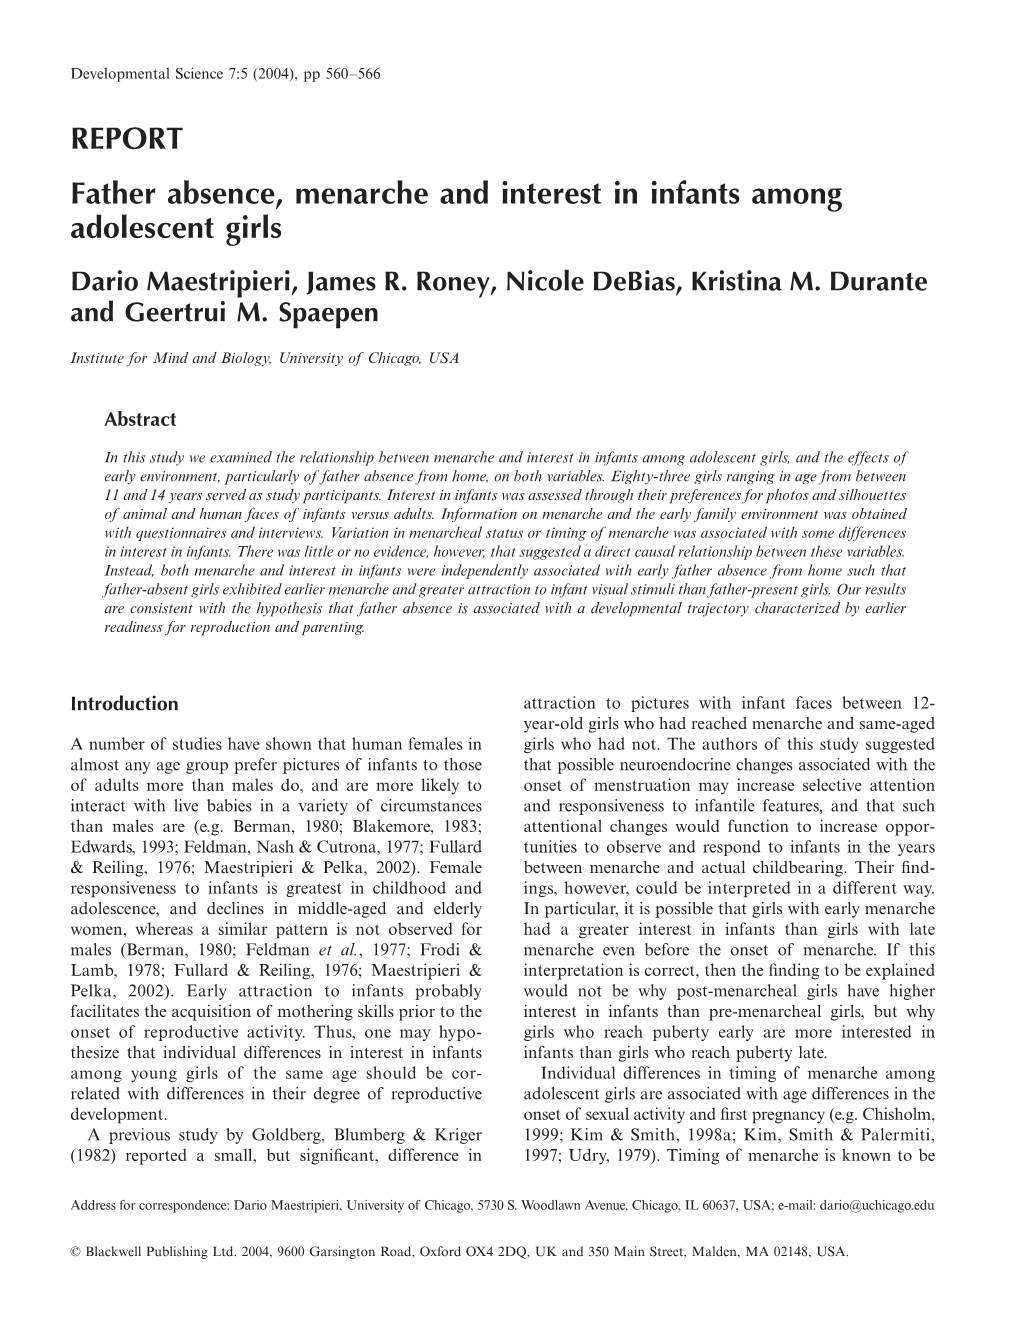 REPORT Father Absence, Menarche and Interest in Infants Among Adolescent Girls